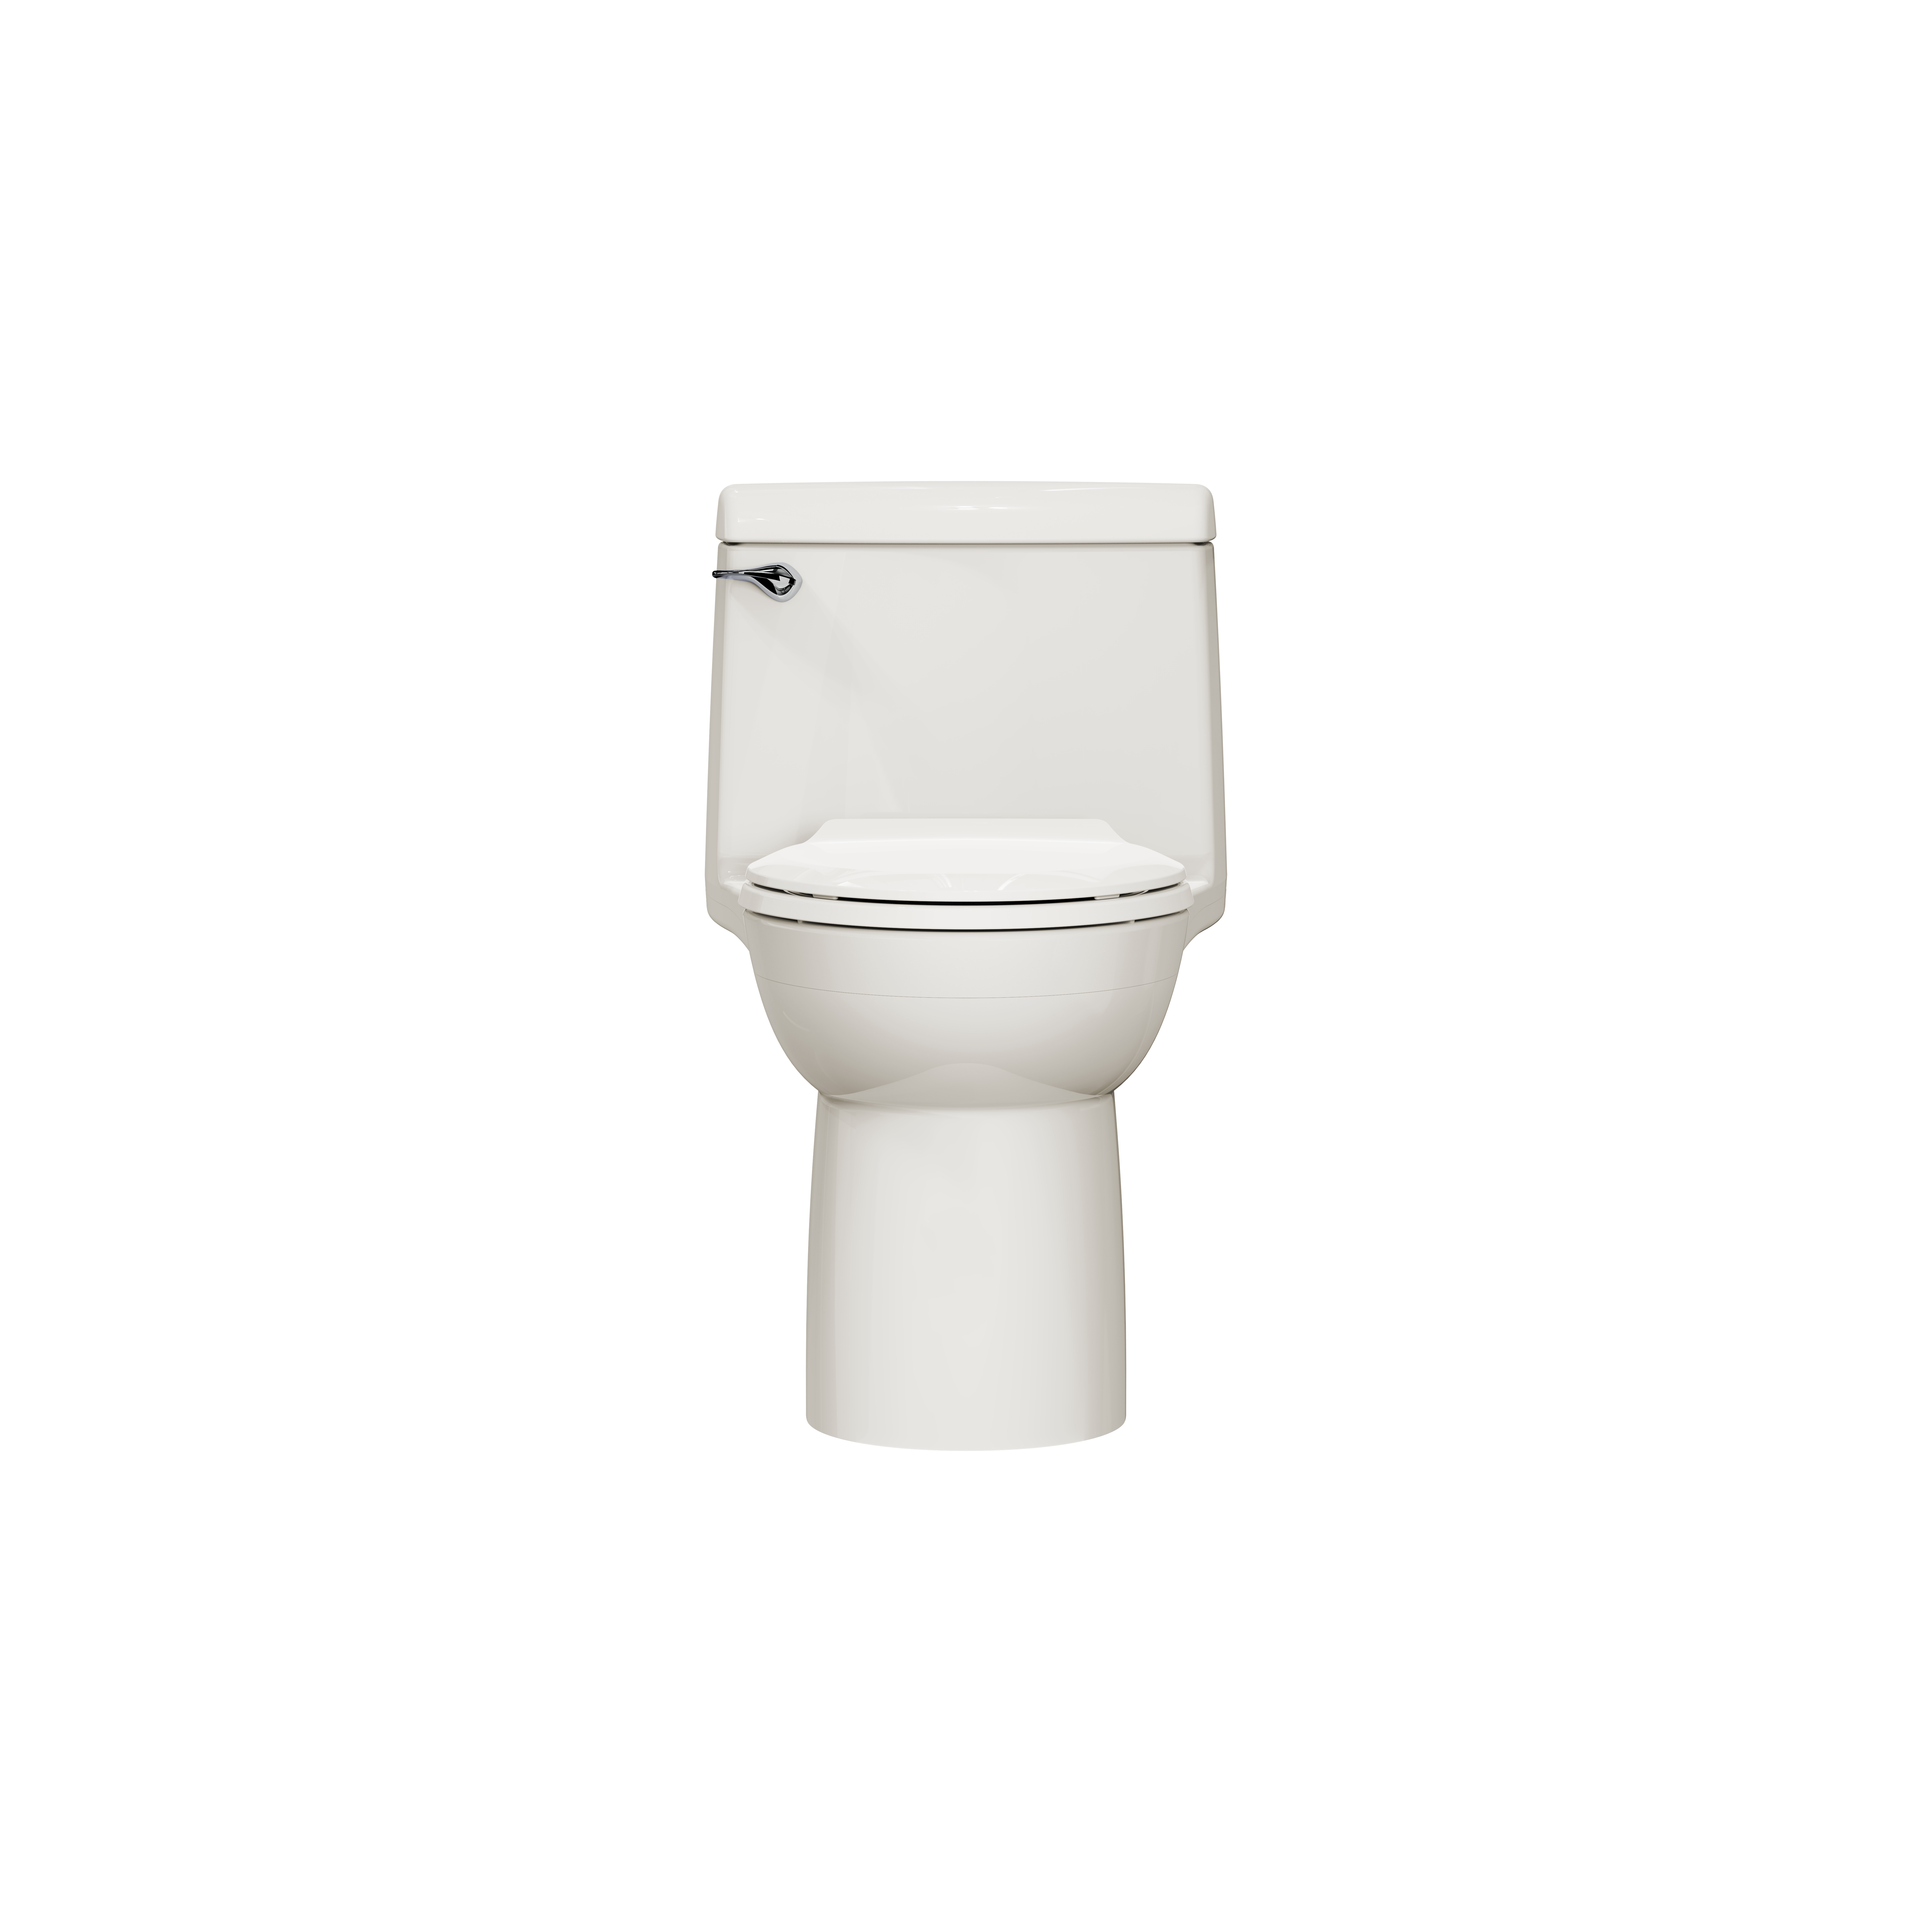 Champion™ 4 One-Piece 1.6 gpf/6.0 Lpf Chair Height Elongated Toilet With Seat